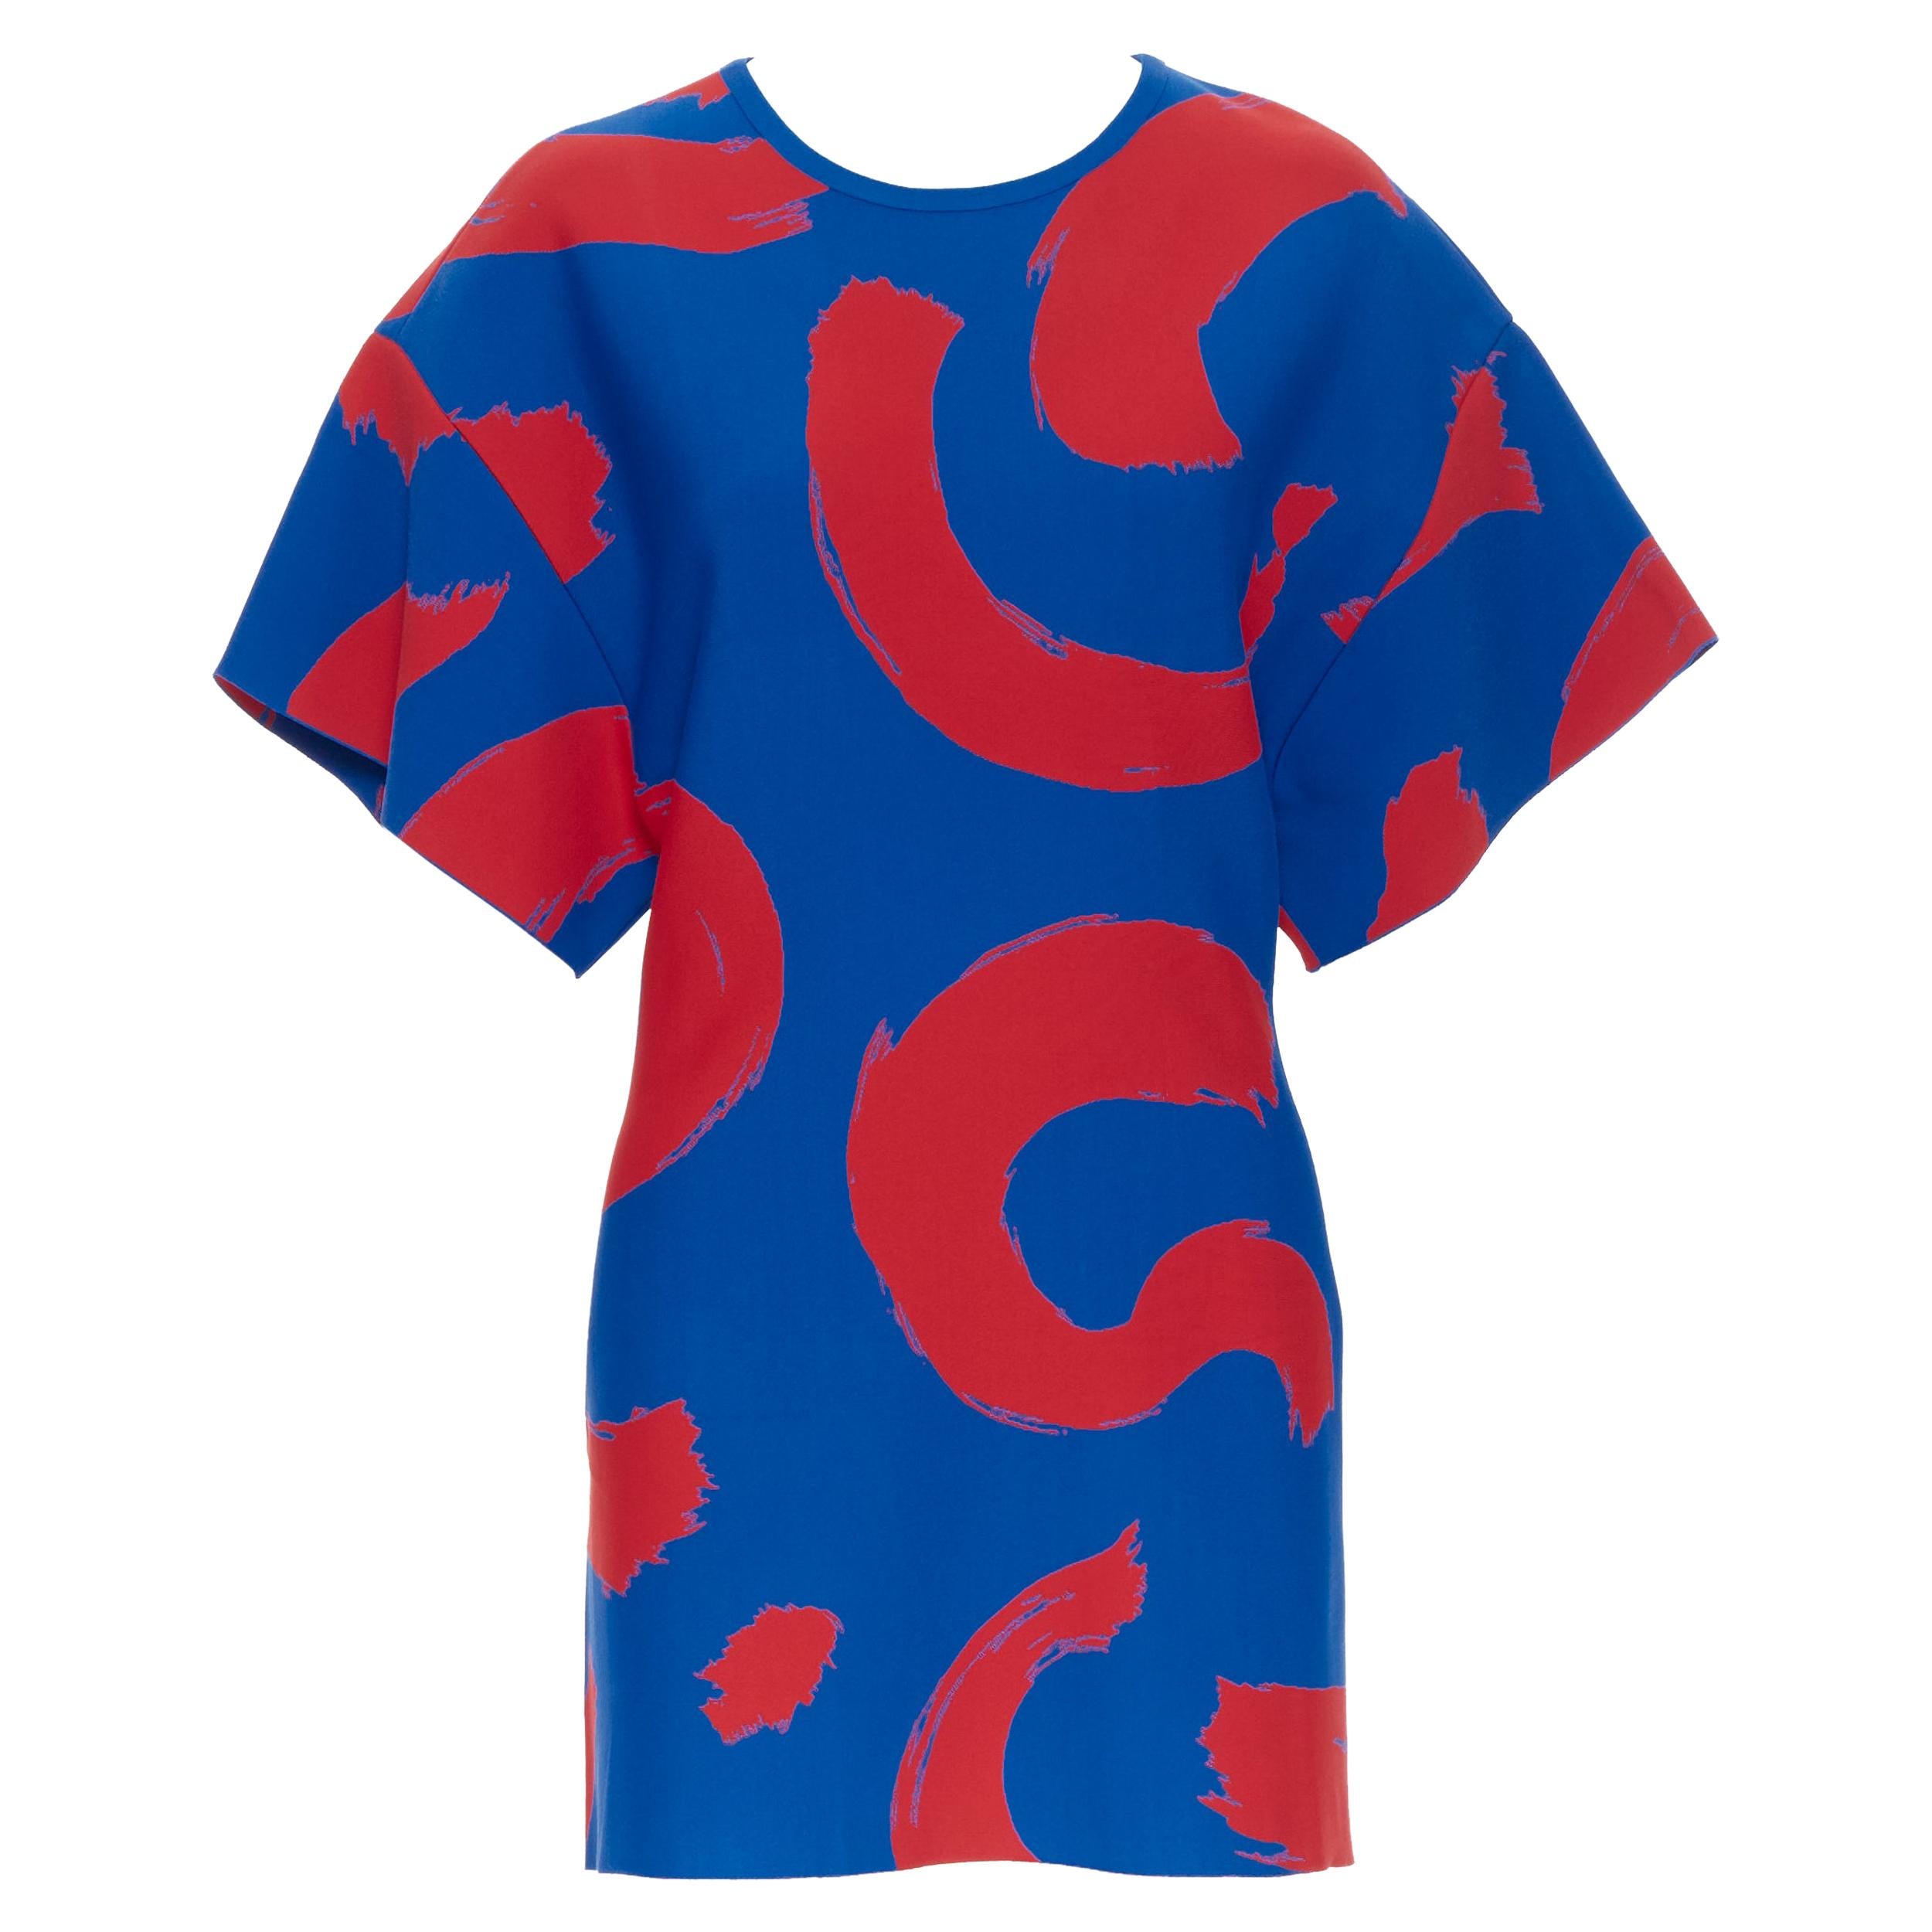 runway OLD CELINE SS14 red blue pop brush stroke oversized tunic tunic top L